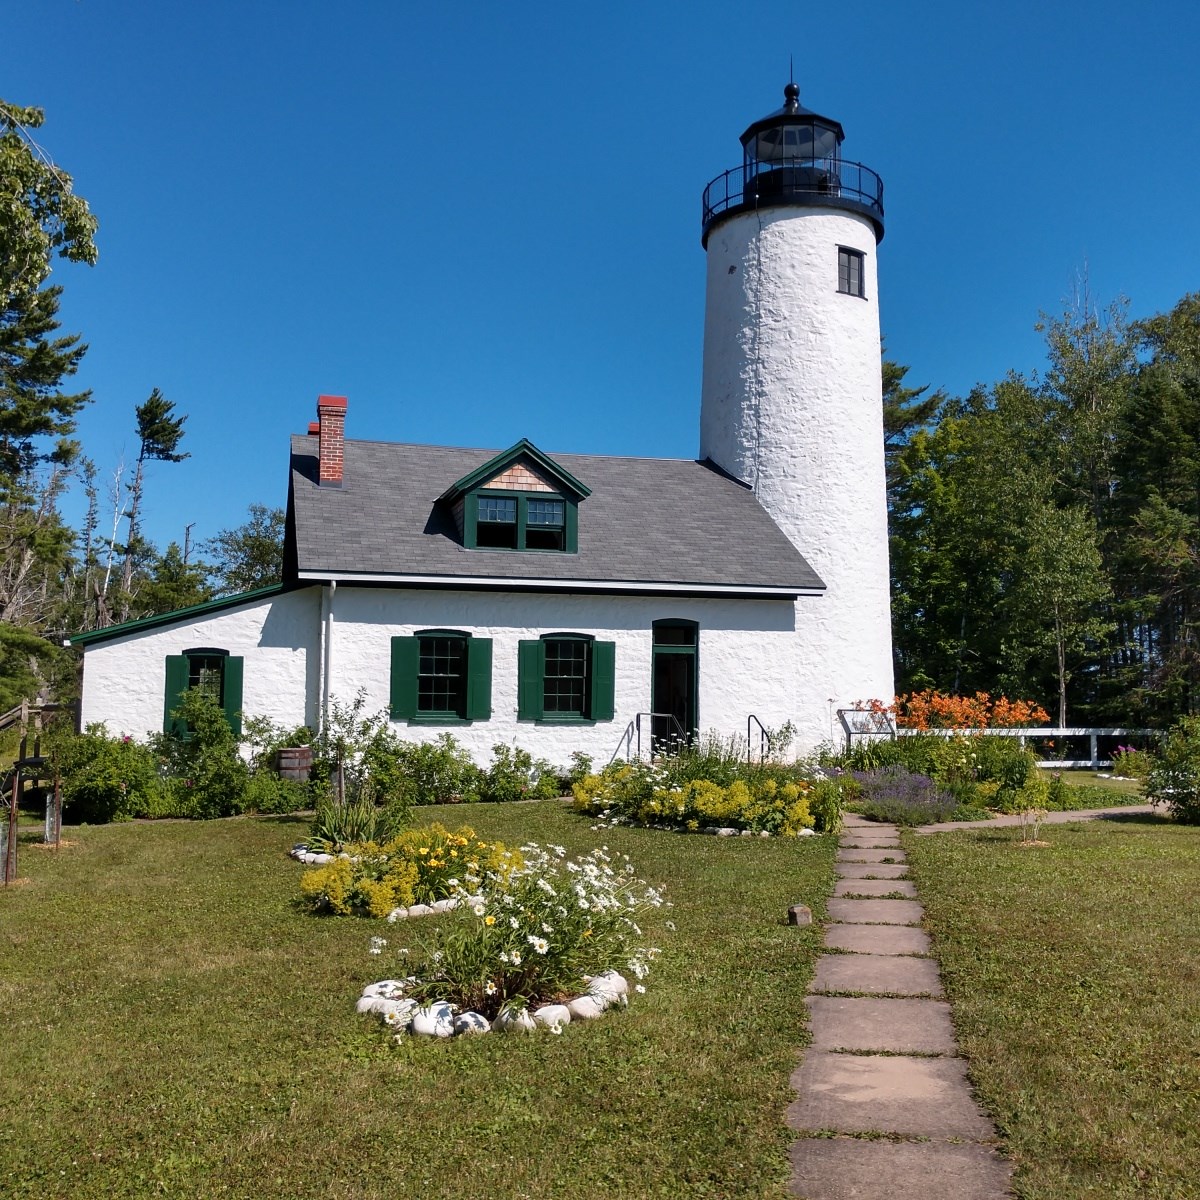 A walkway leads to a short lighthouse, with garden beds in front